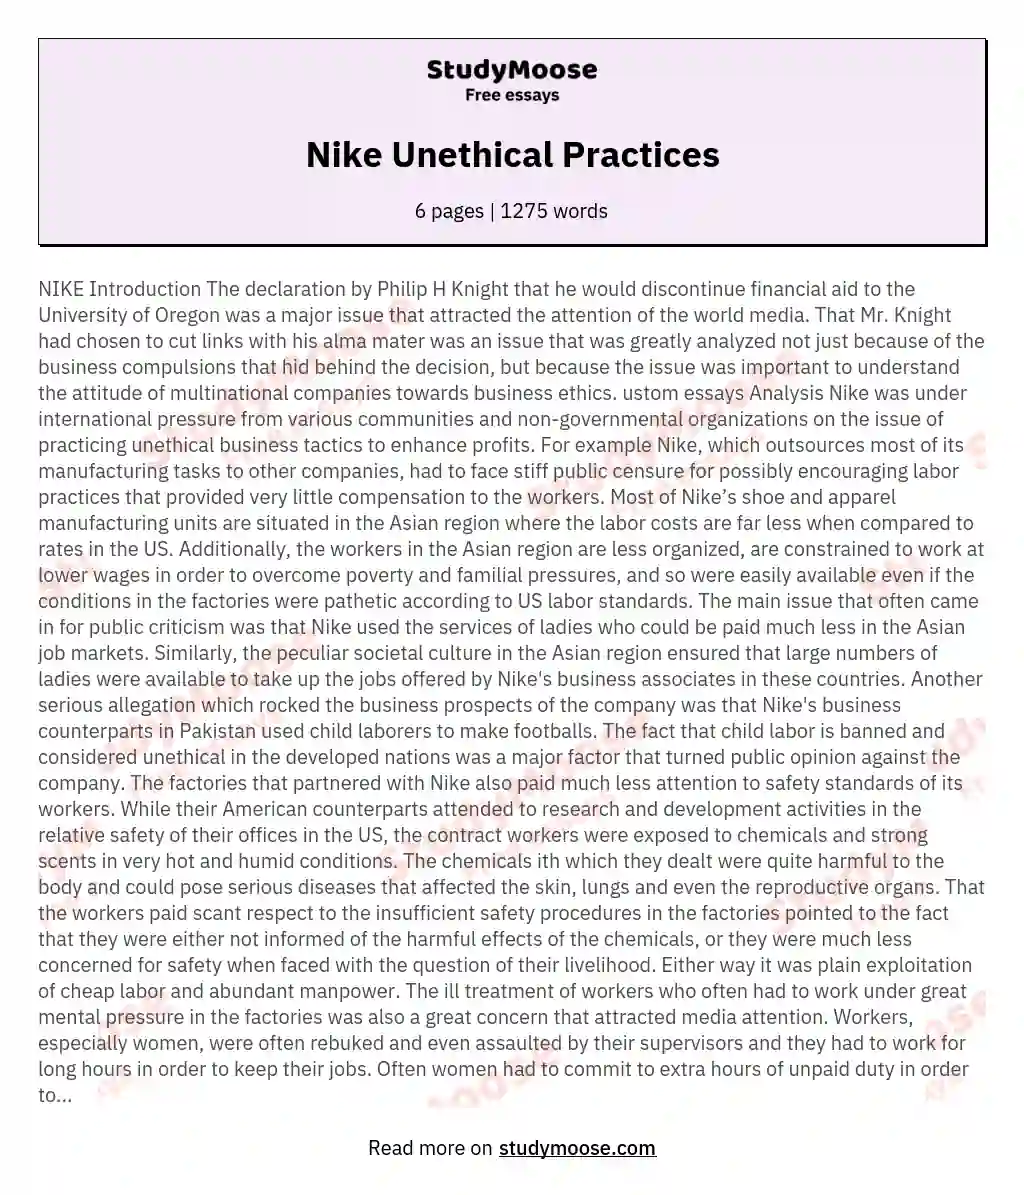 Nike Unethical Practices essay